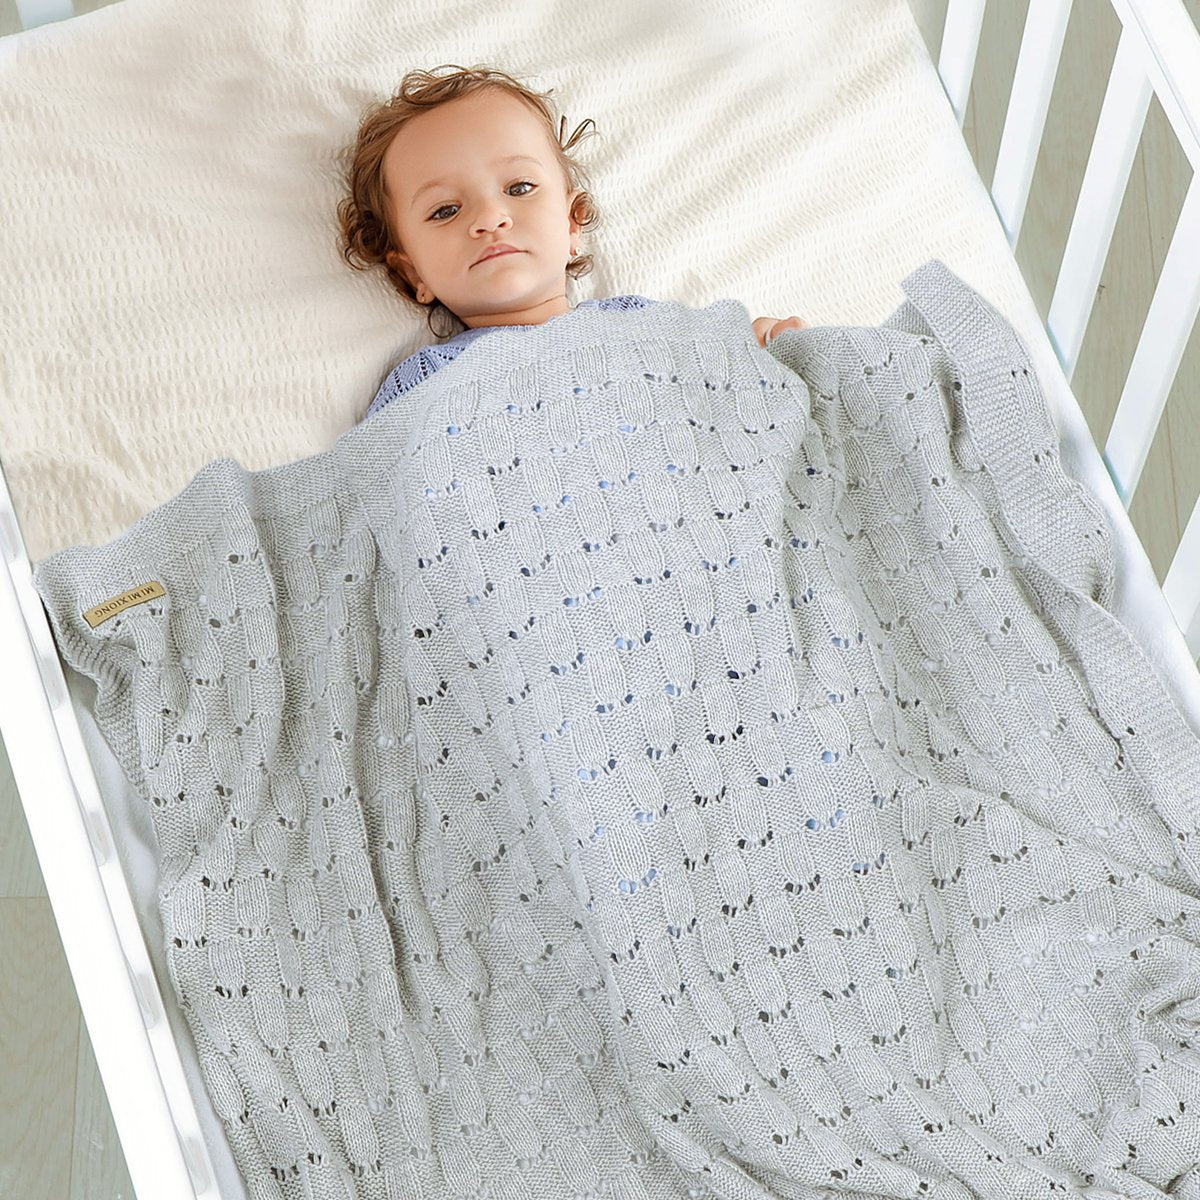 Hollow Multifunctional Cover Blanket For Infants Baby Clothes Wholesale Distributors